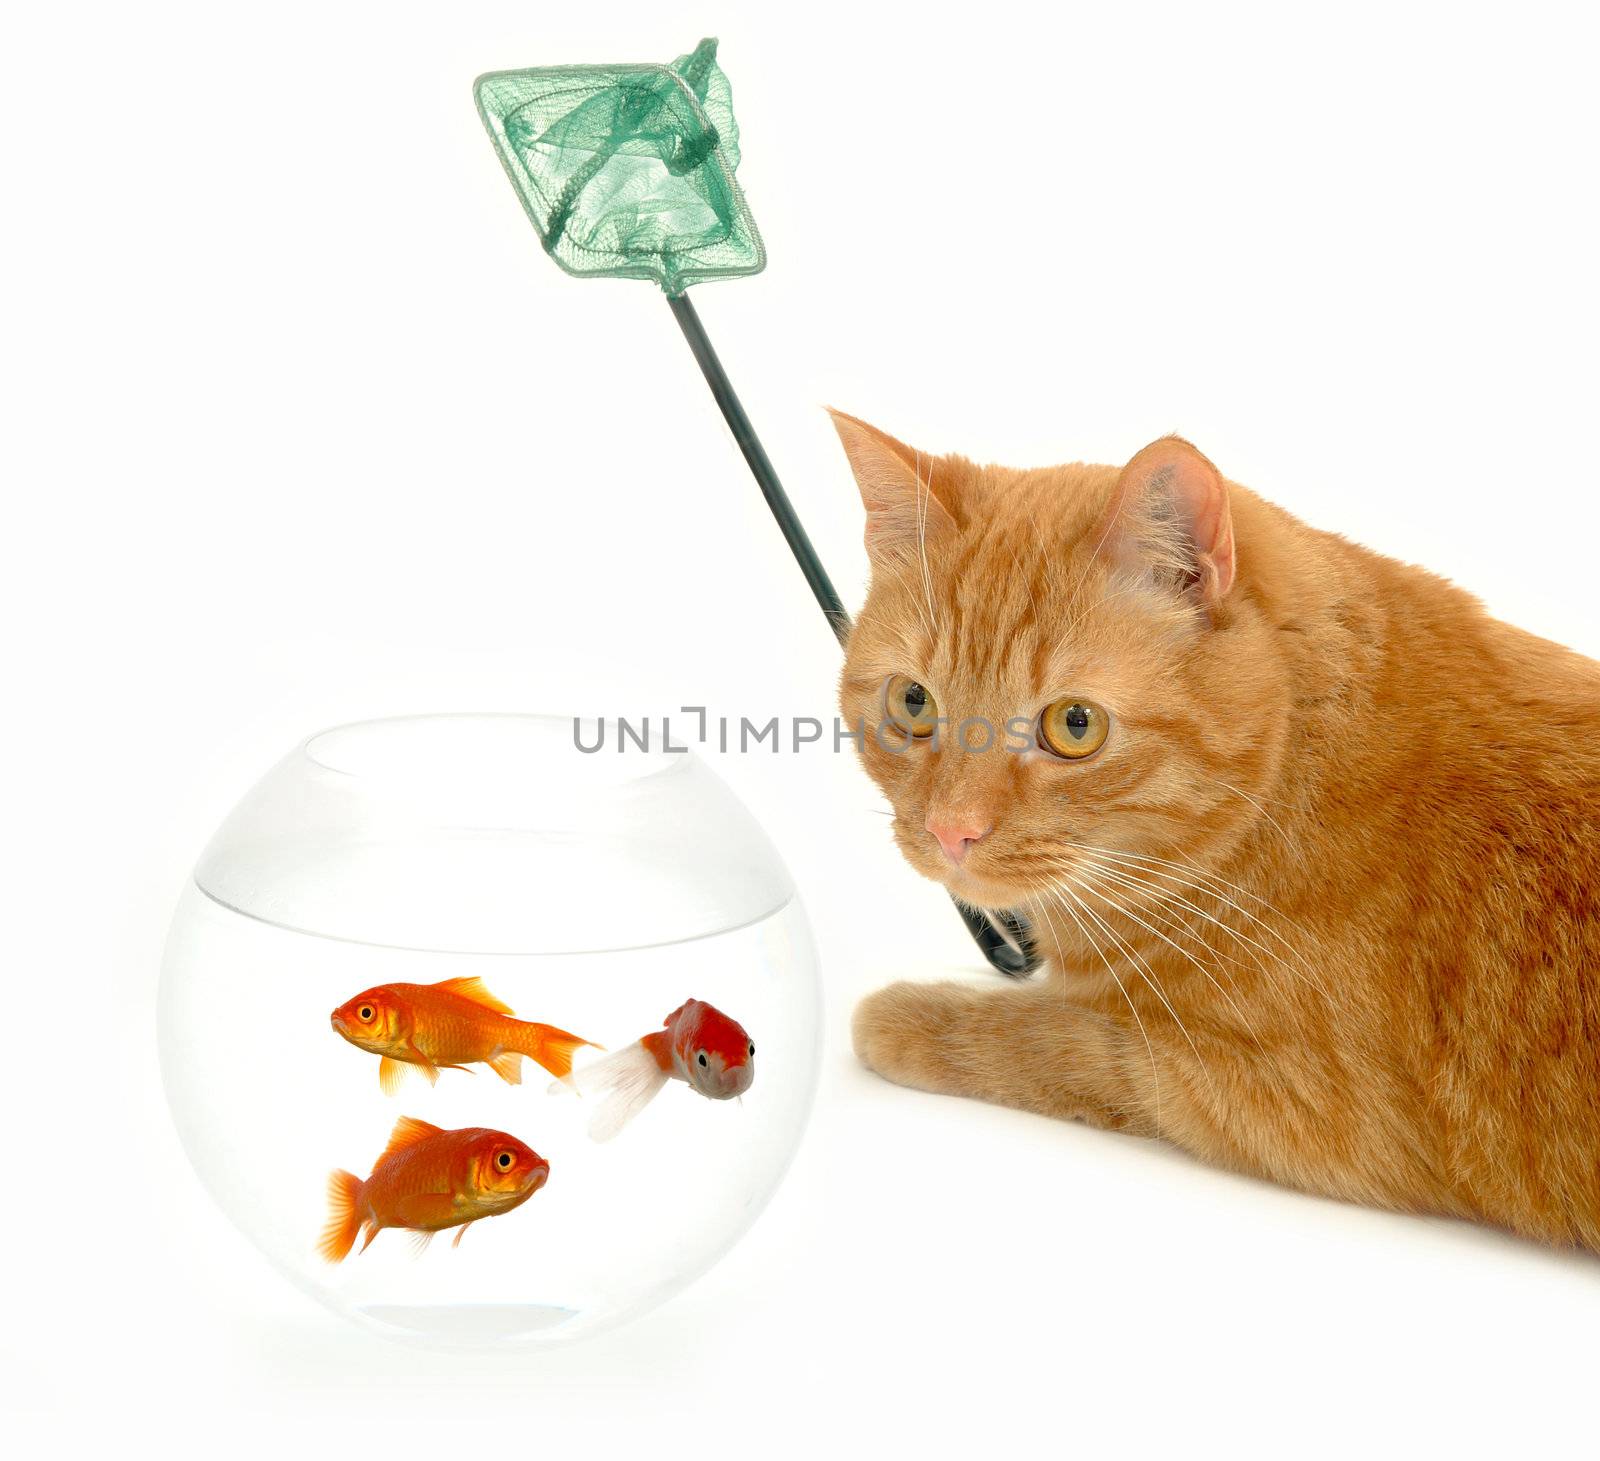 Cat is holding a fishingnet, ready to catch goldfish.